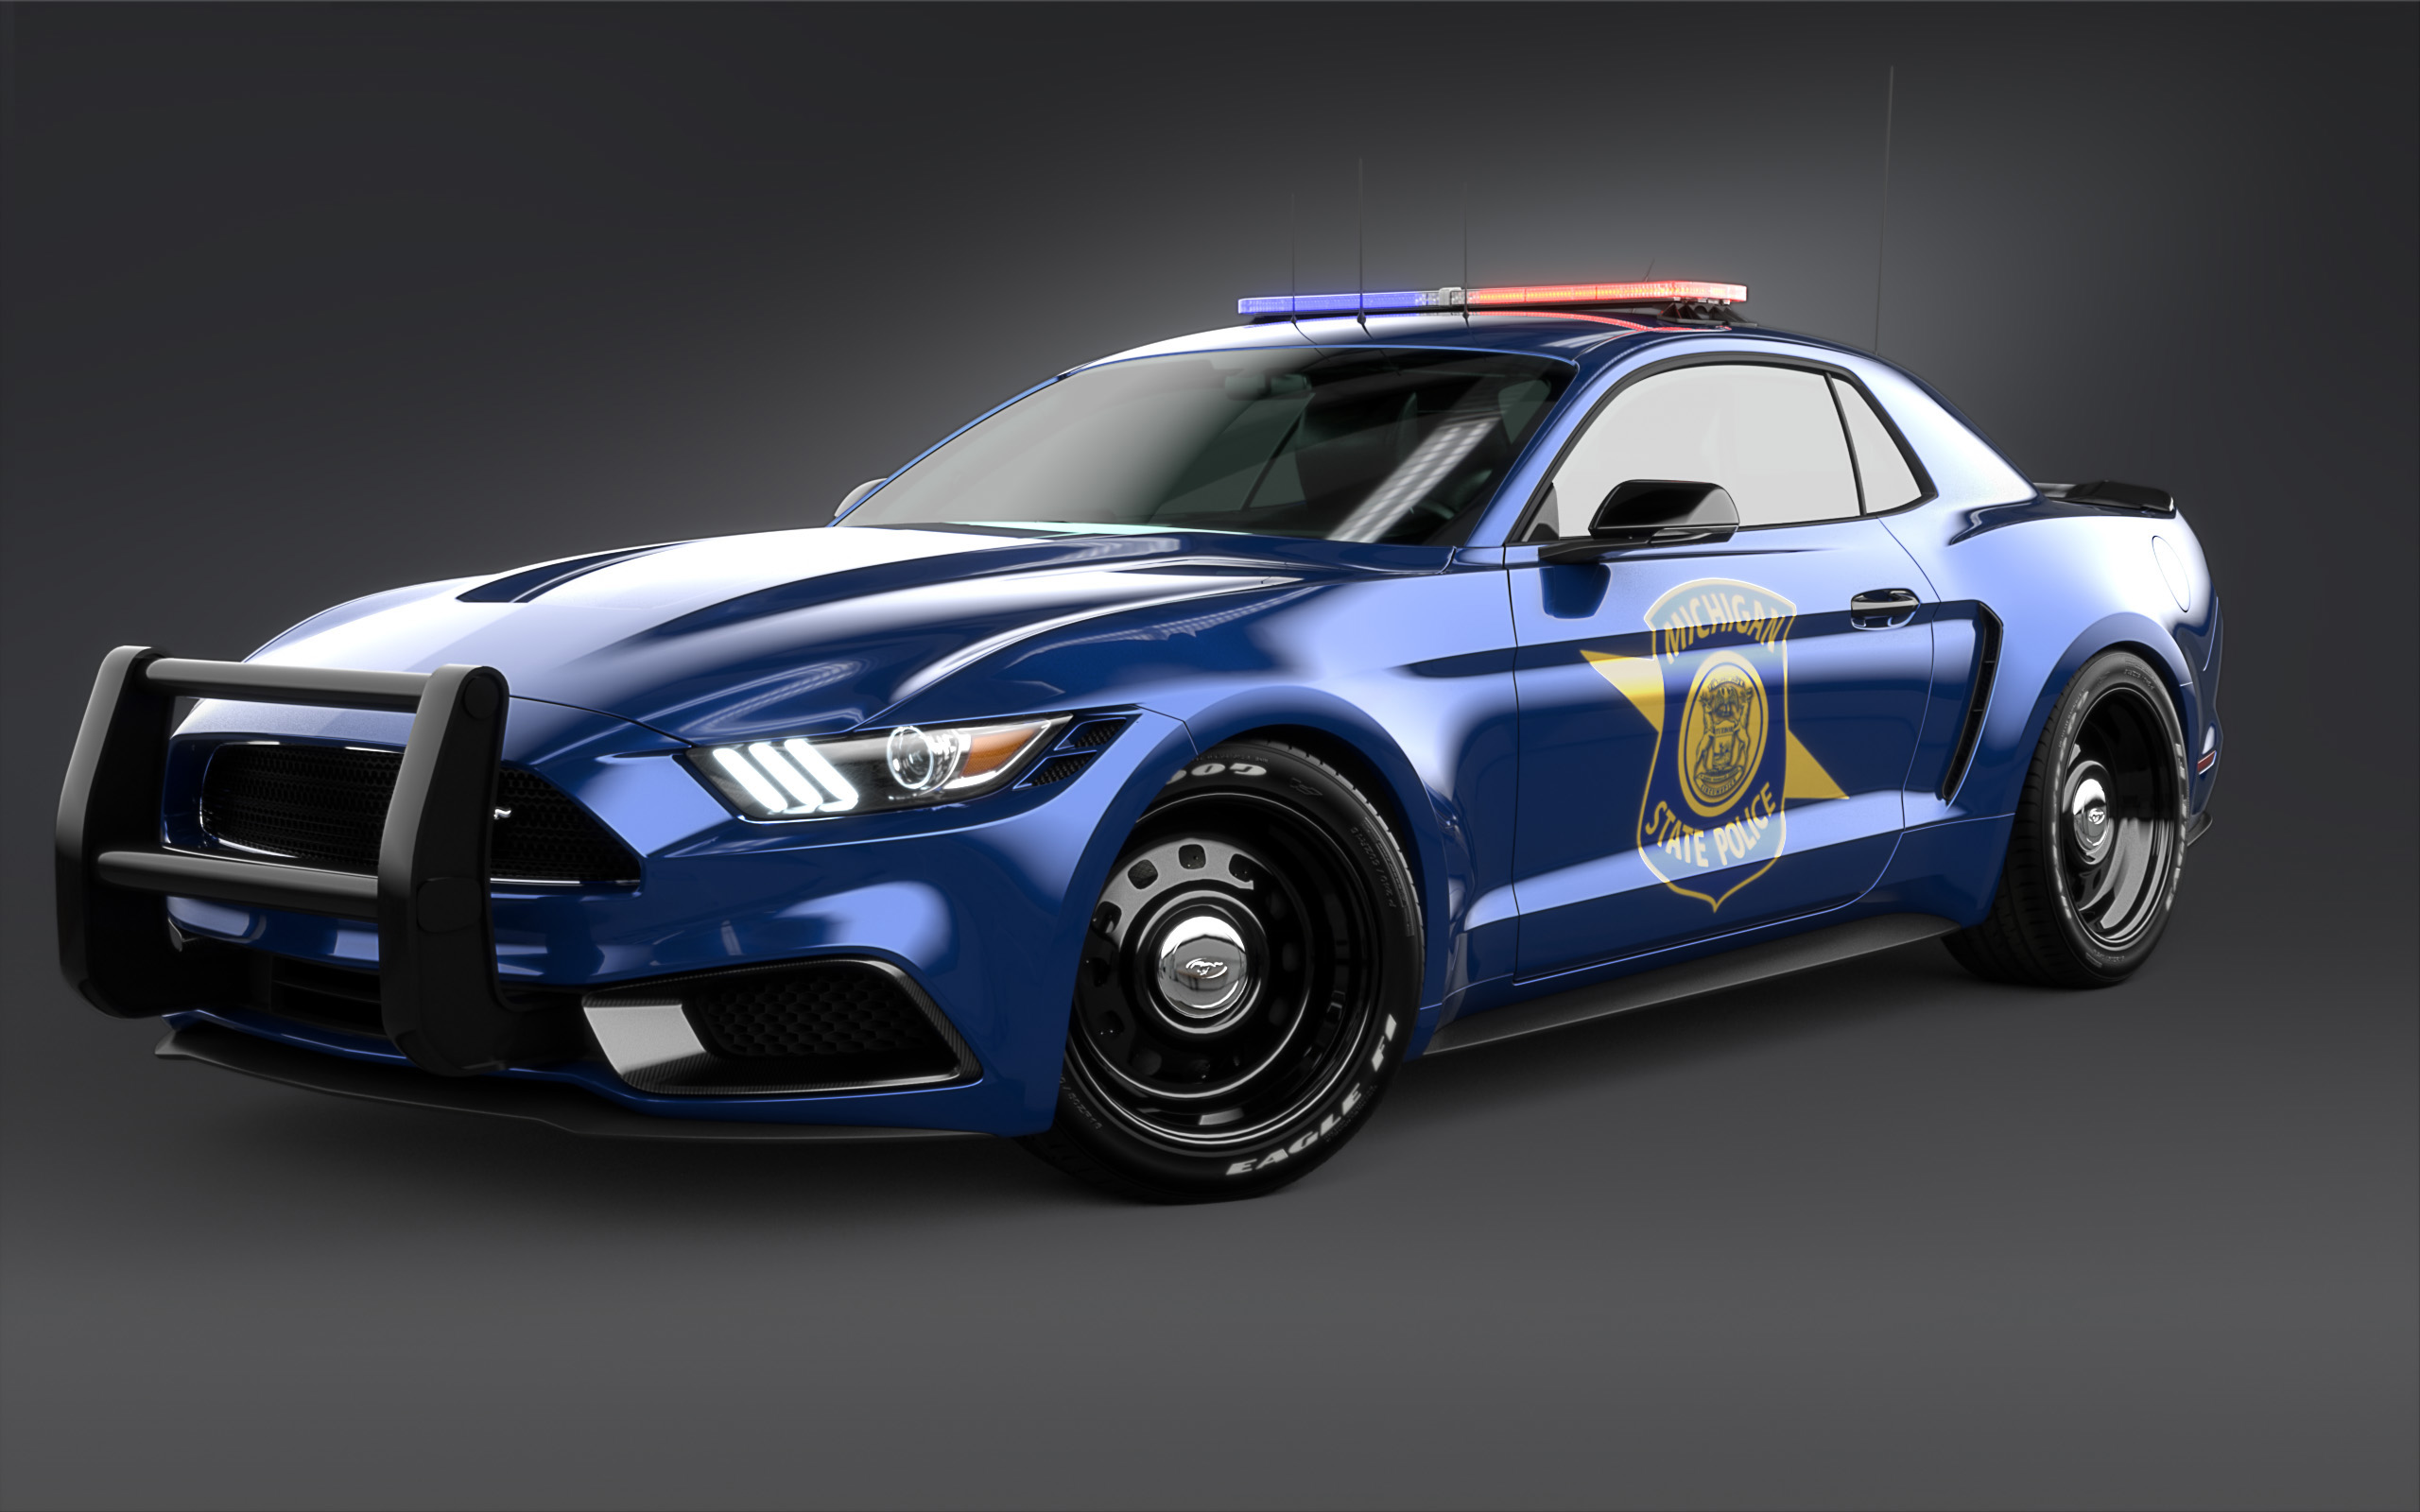 vehicles, ford mustang, car, ford mustang notchback, ford, muscle car, police car